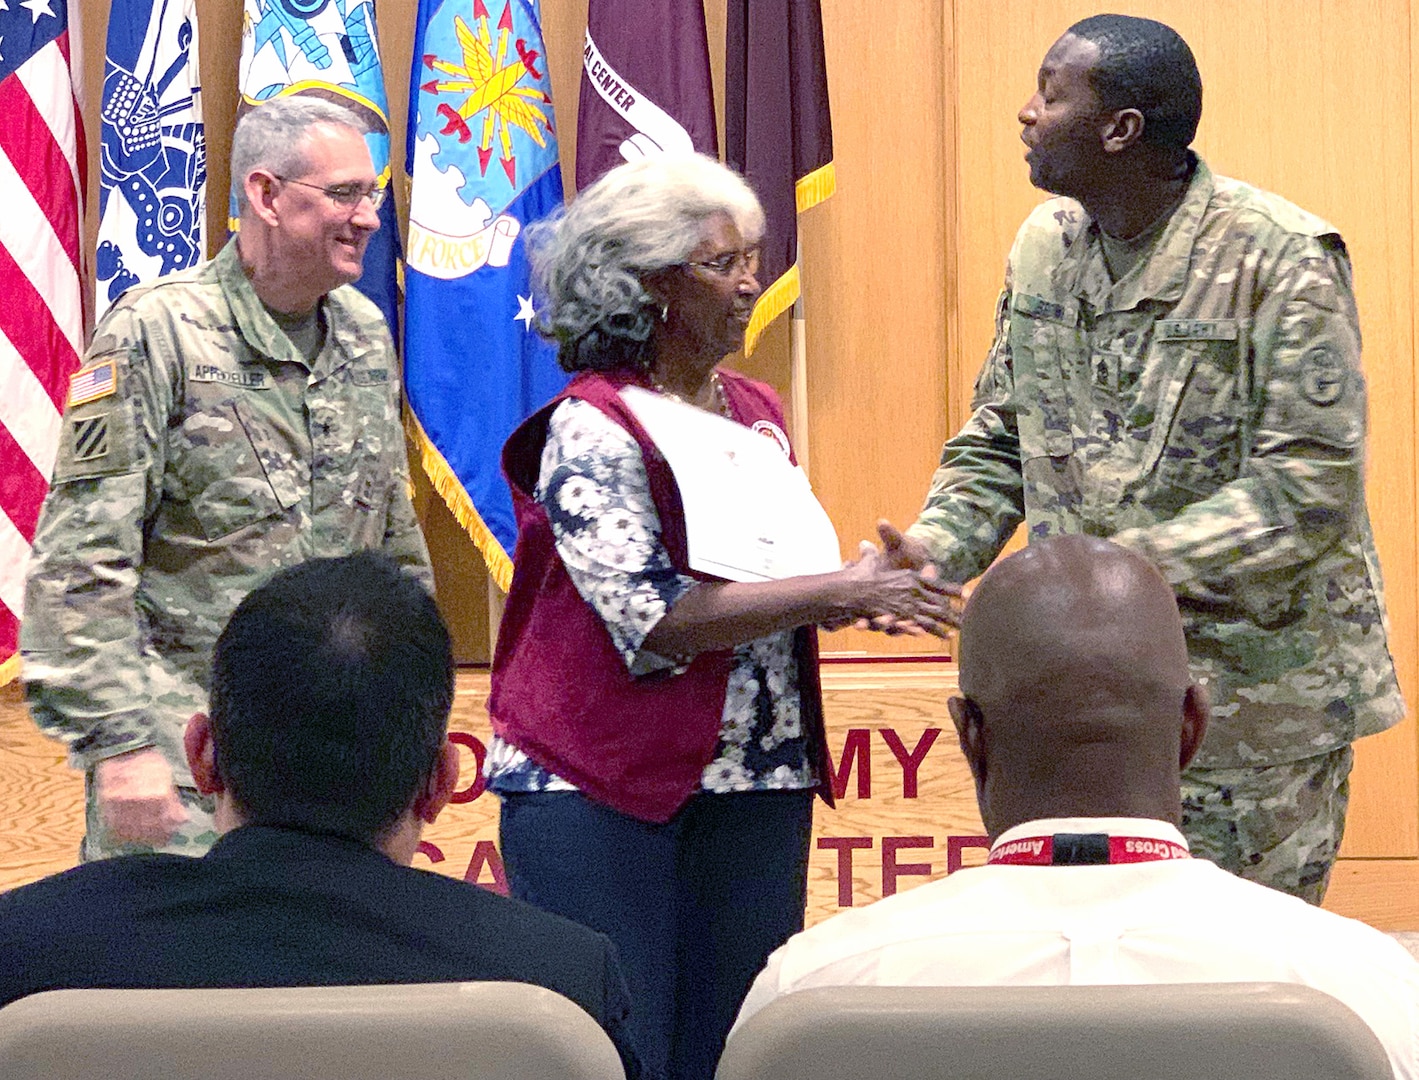 Brig. Gen. George Appenzeller, BAMC commanding general, and Command Sgt. Maj. James Brown present Barbara Williams with the President’s Lifetime Achievement Award May 30 for her more than 4,750 service hours at the community/refill pharmacy at Joint Base San Antonio-Fort Sam Houston.